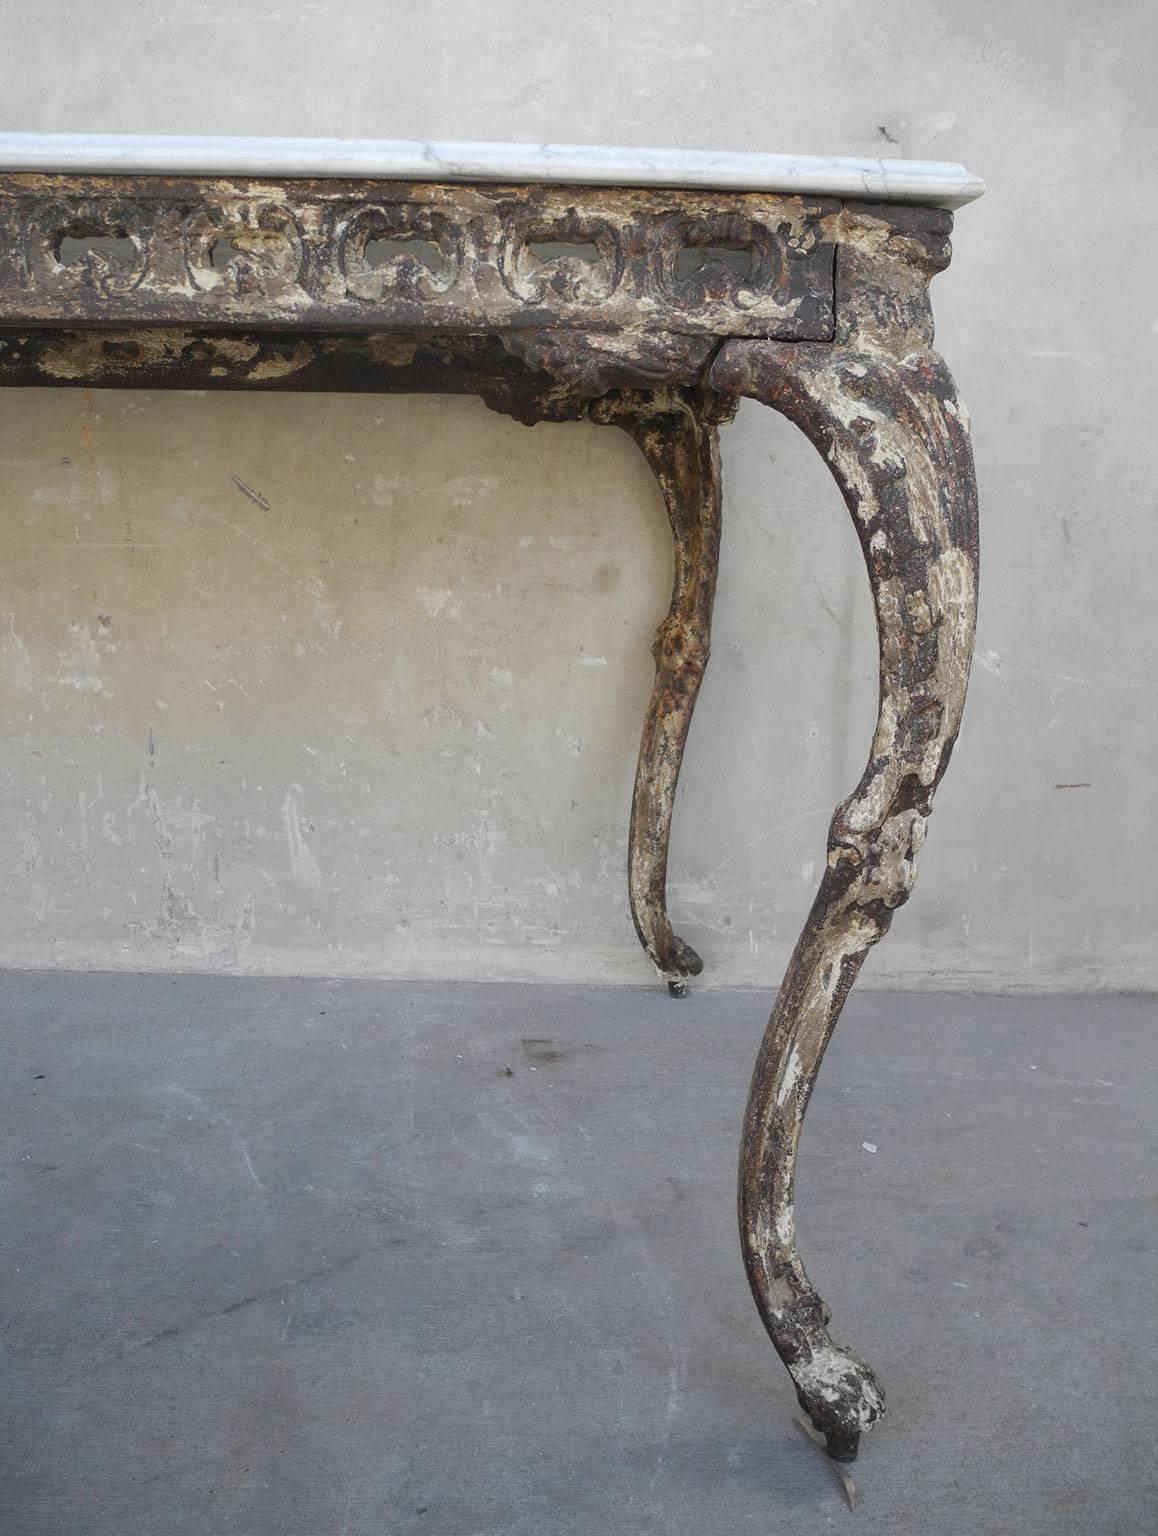 This is a beautifull reclaimed 19th century Italian iron and marble table from an Orangerie. The bottom is made of antique iron while the top is a large piece of white marble. It is luxurious in feel and very sturdy. It has intricately carved legs